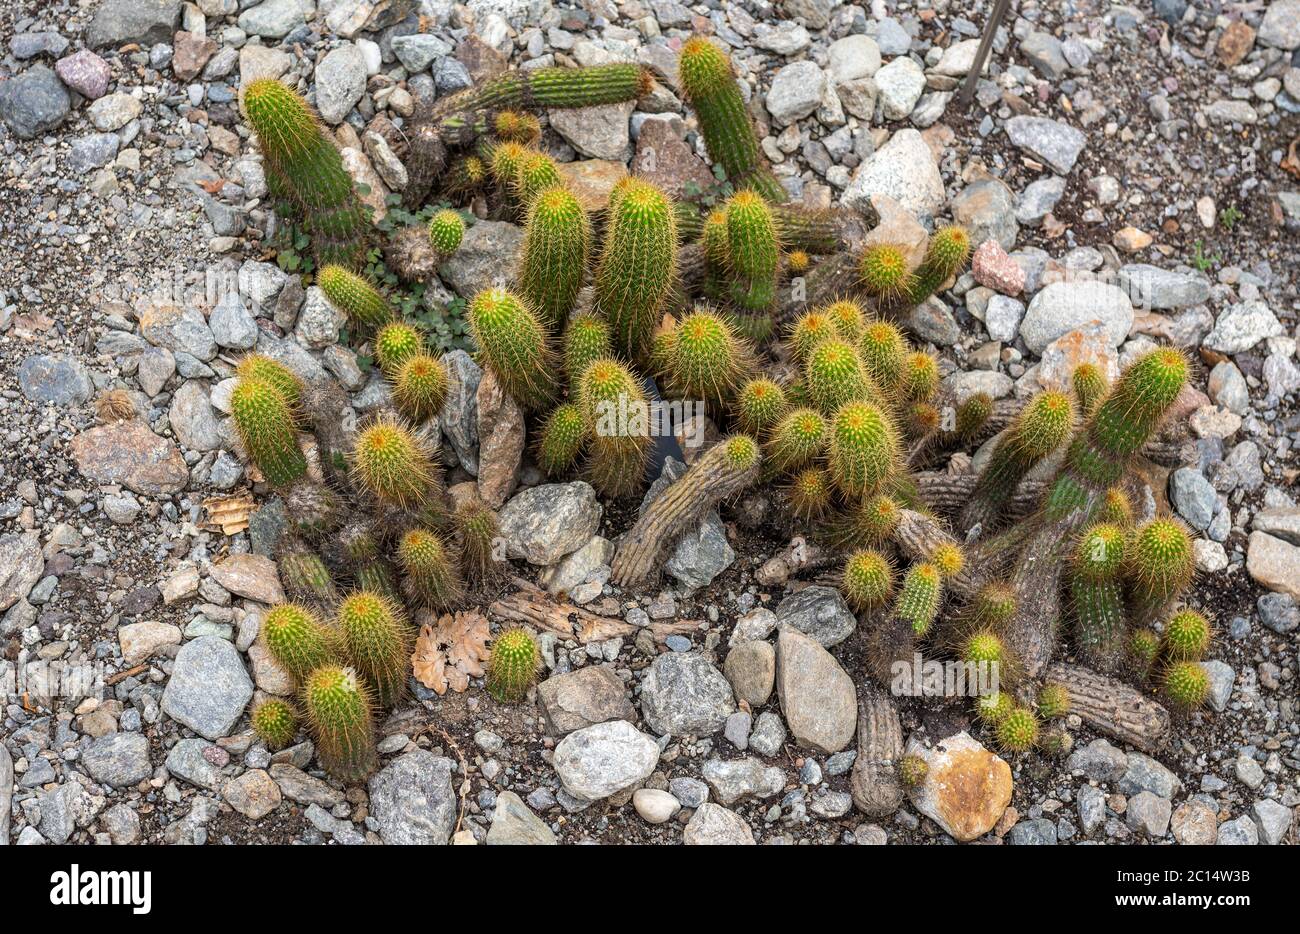 Echinopsis huascha, commonly called the Red Torch cactus is native to Argentina. Stock Photo